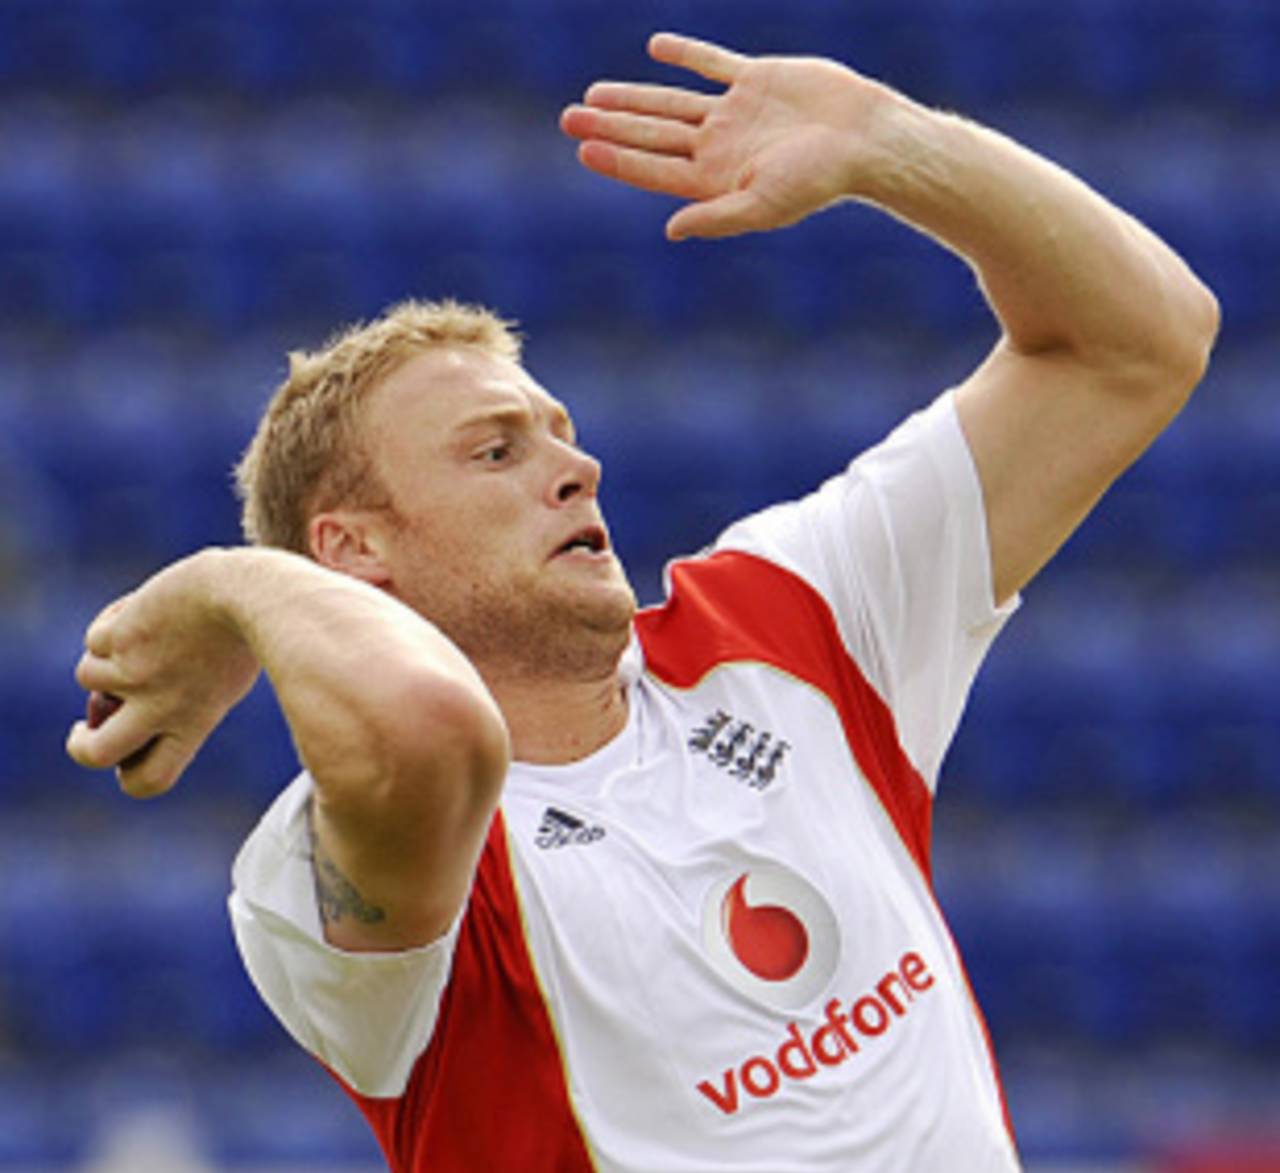 Andrew Flintoff steams in during a net session at Cardiff, England v Australia, 1st Test, Cardiff, July 7, 2009